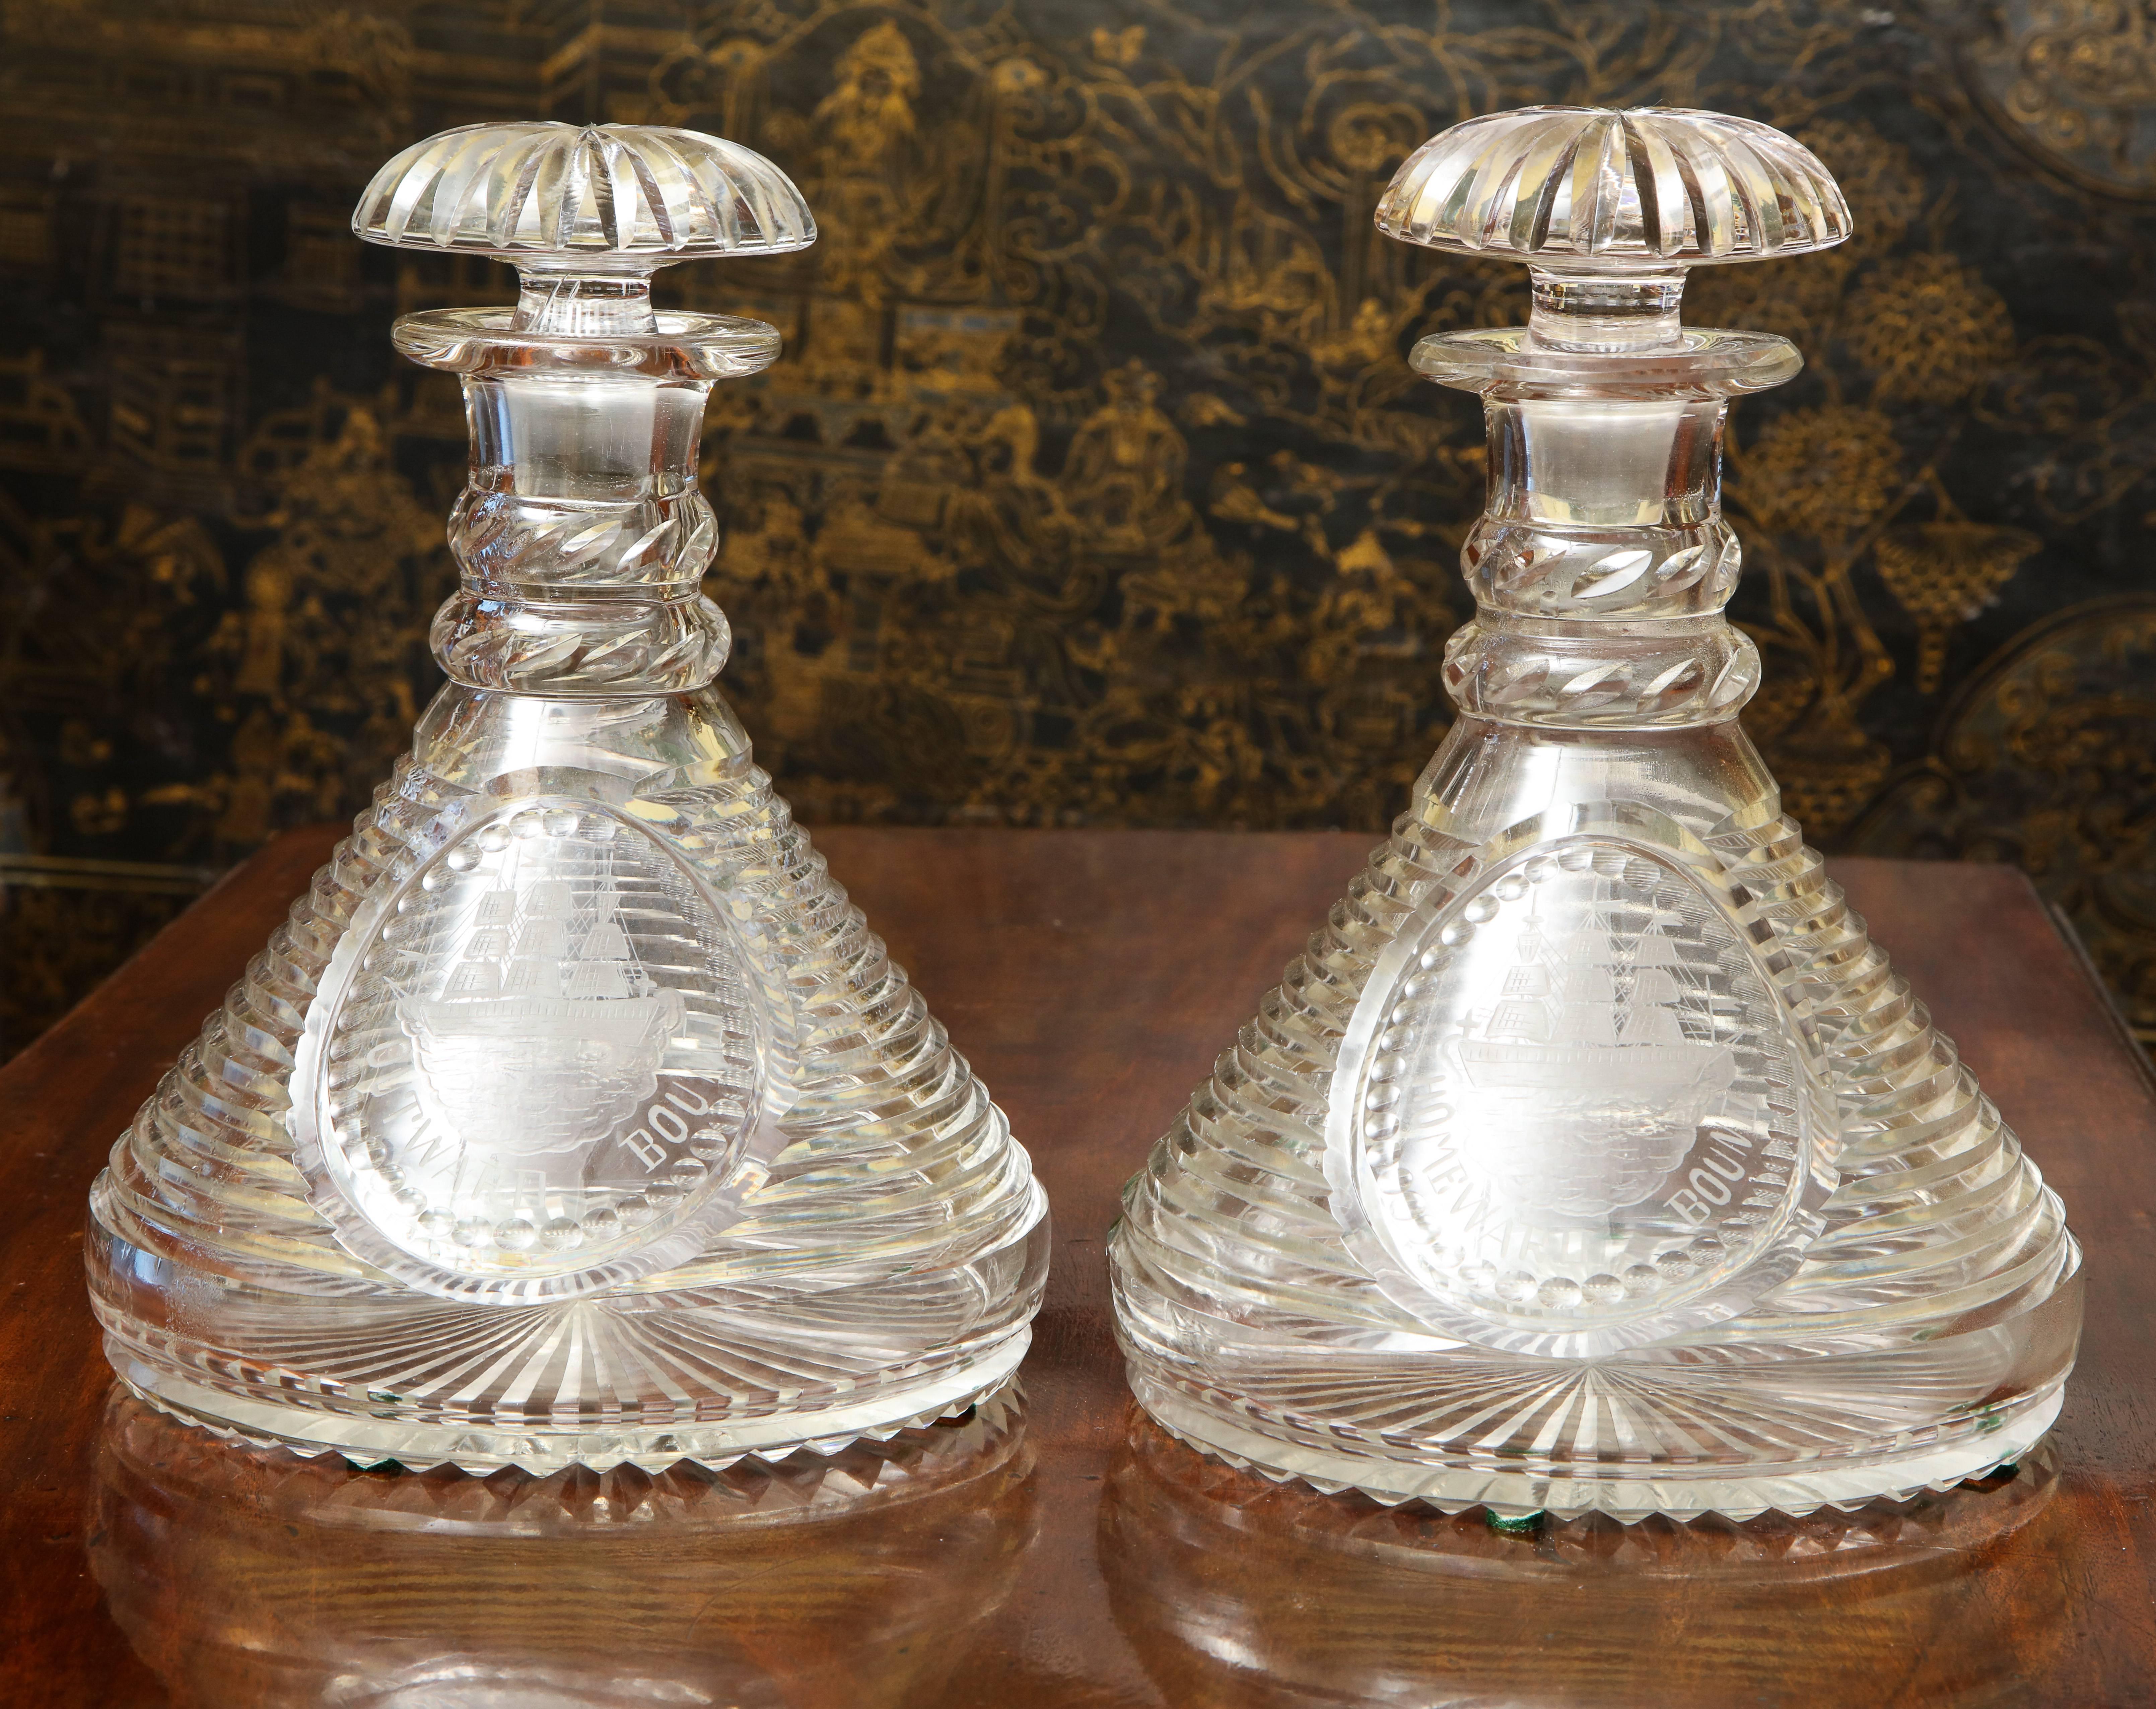 British Pair of Finely Cut Crystal and Engraved Ship's Decanters, English, circa 1875 For Sale